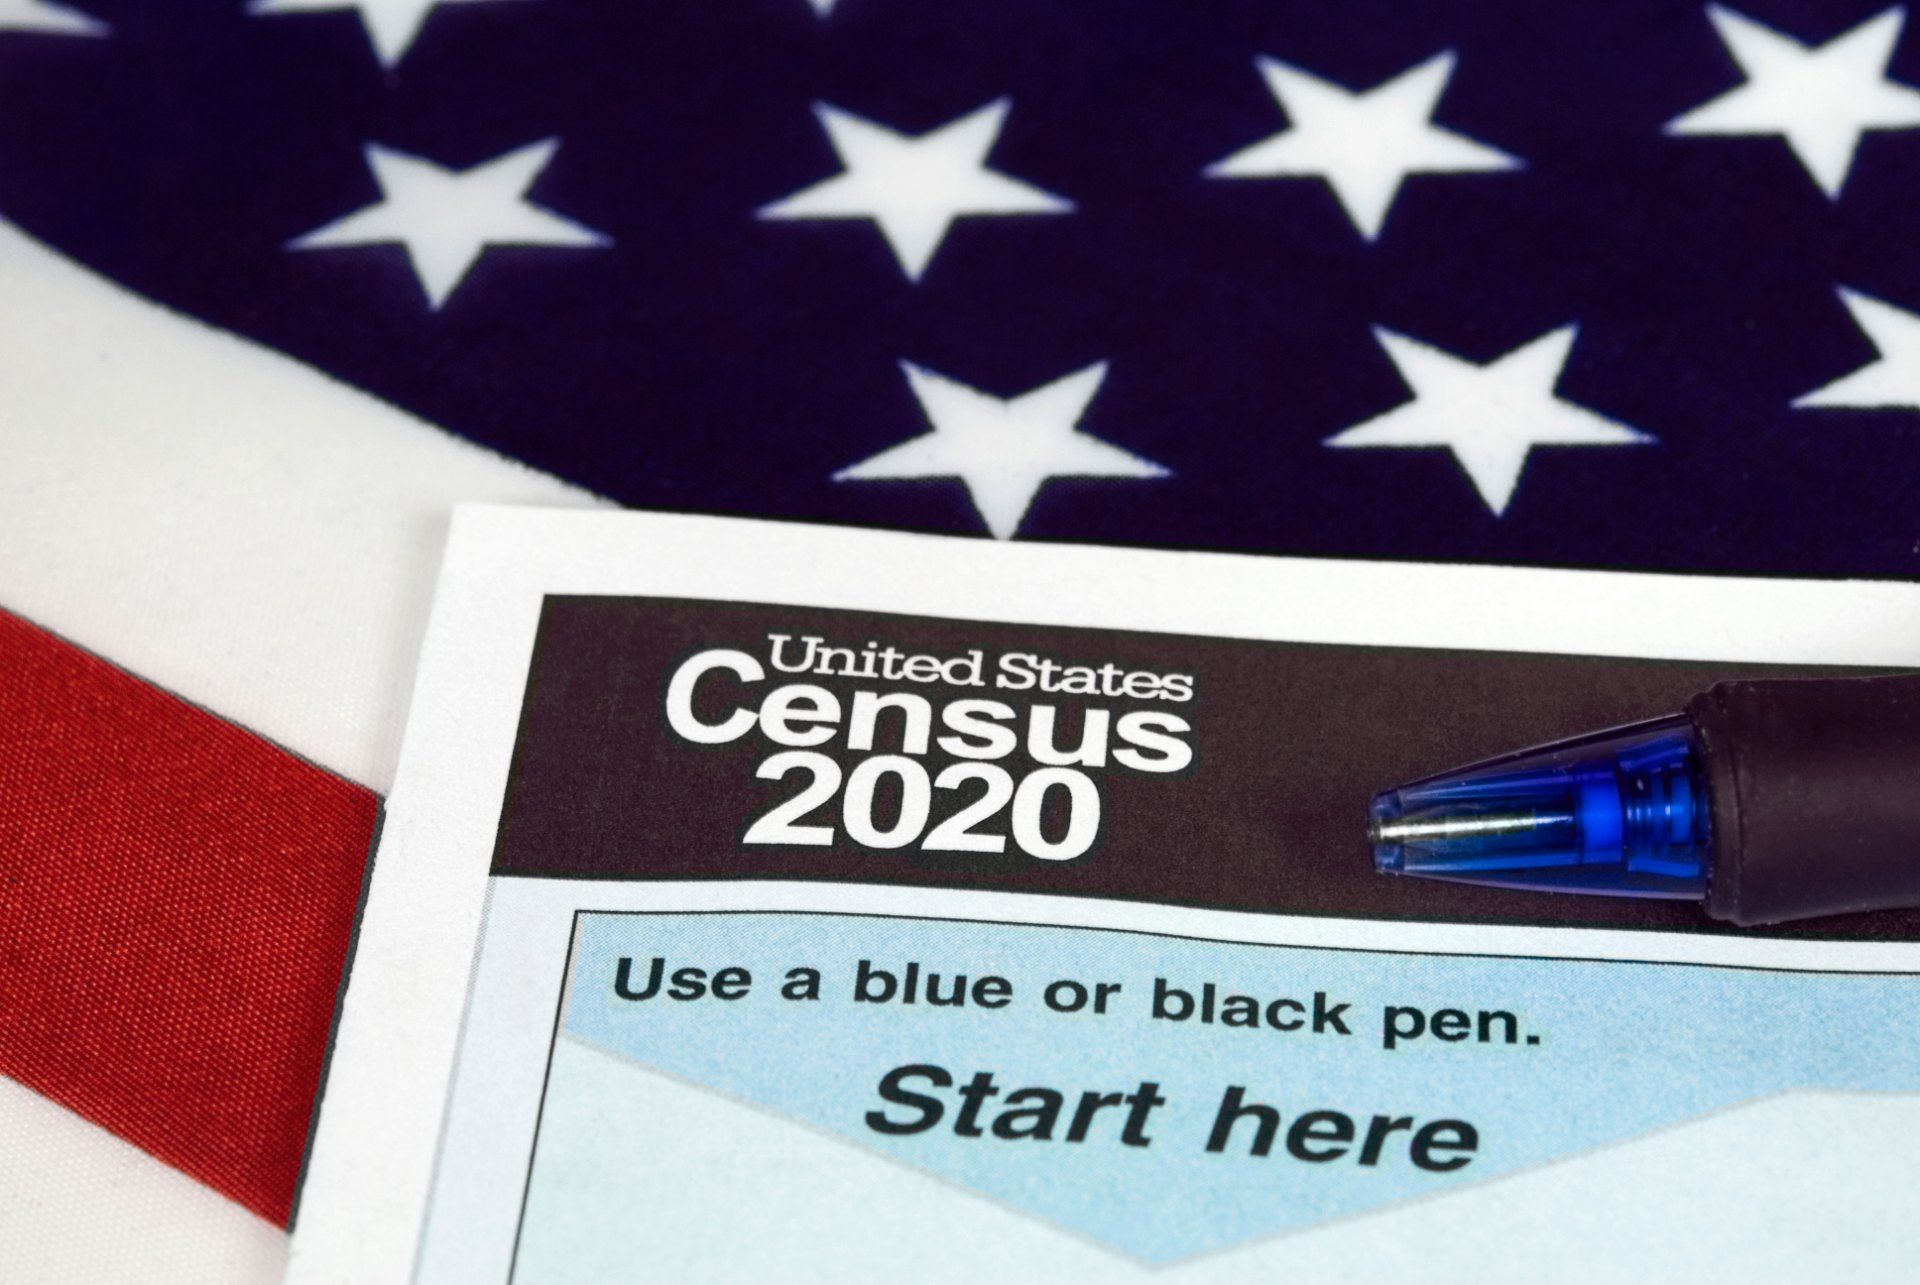 2020 Census form with blue pen, lying on top of U.S. flag - Census data